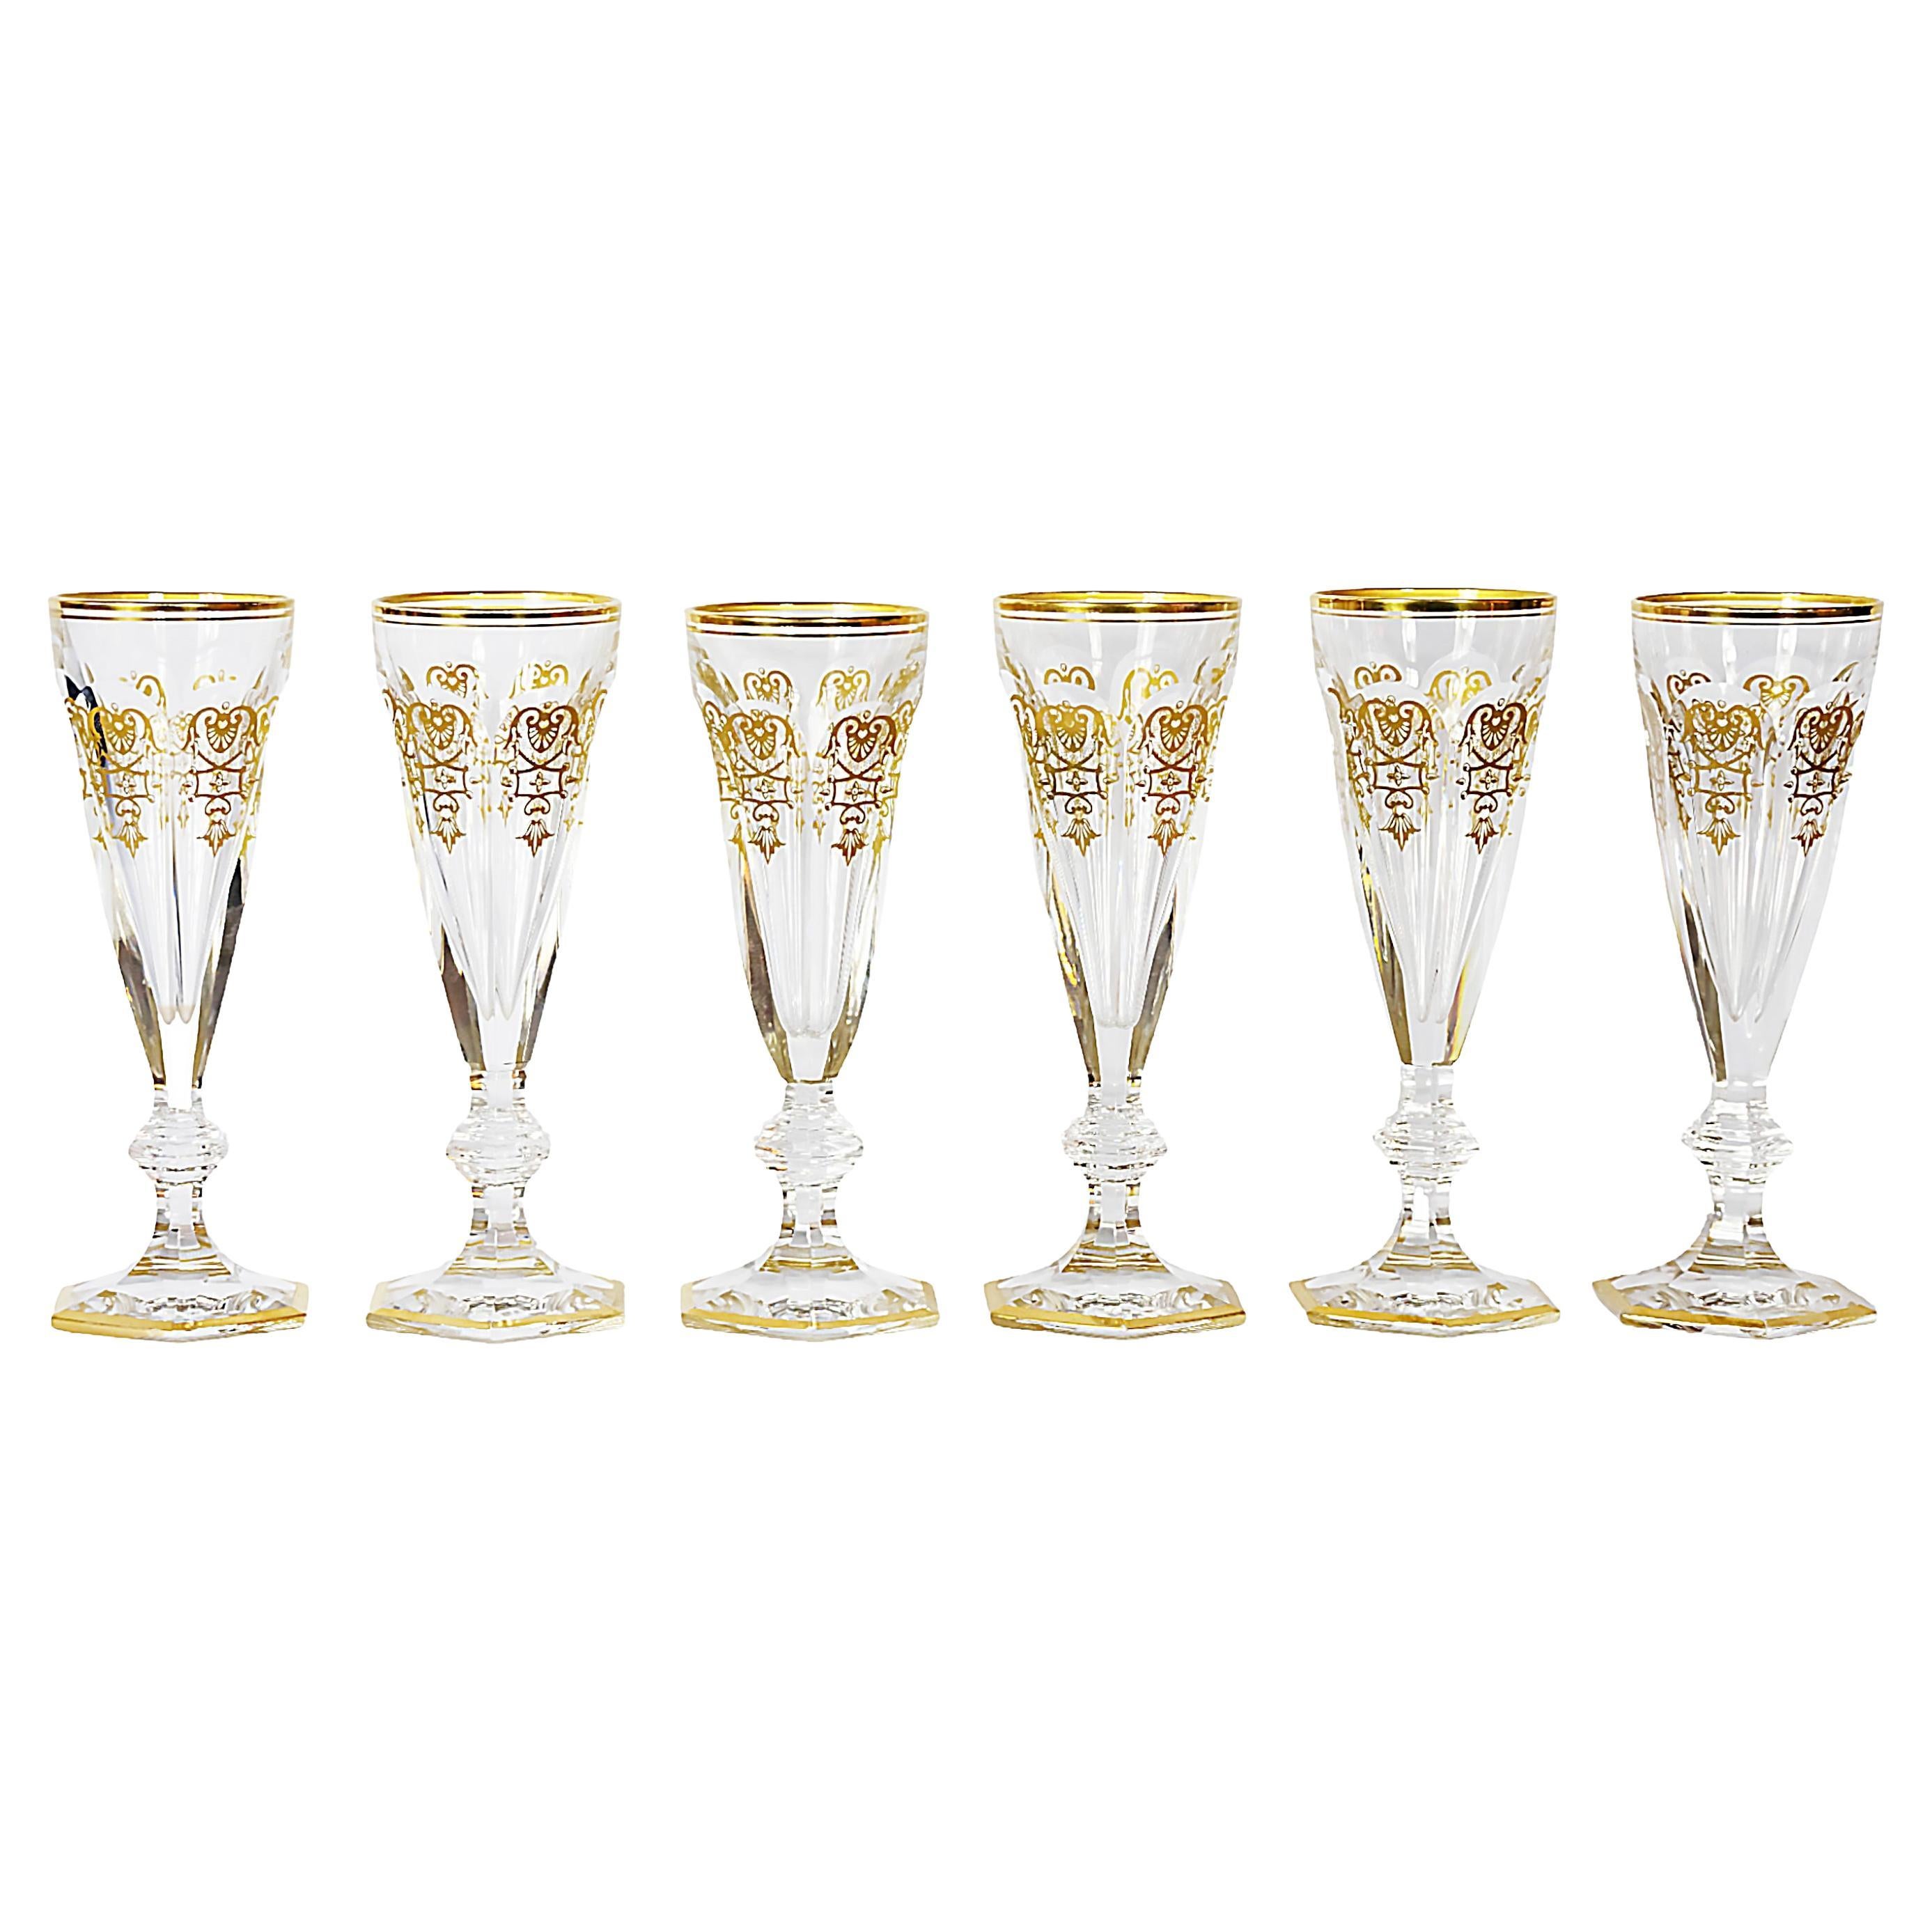 6 Pcs. Set of Baccarat Harcourt Empire Collection Crystal Champagne Flutes For Sale